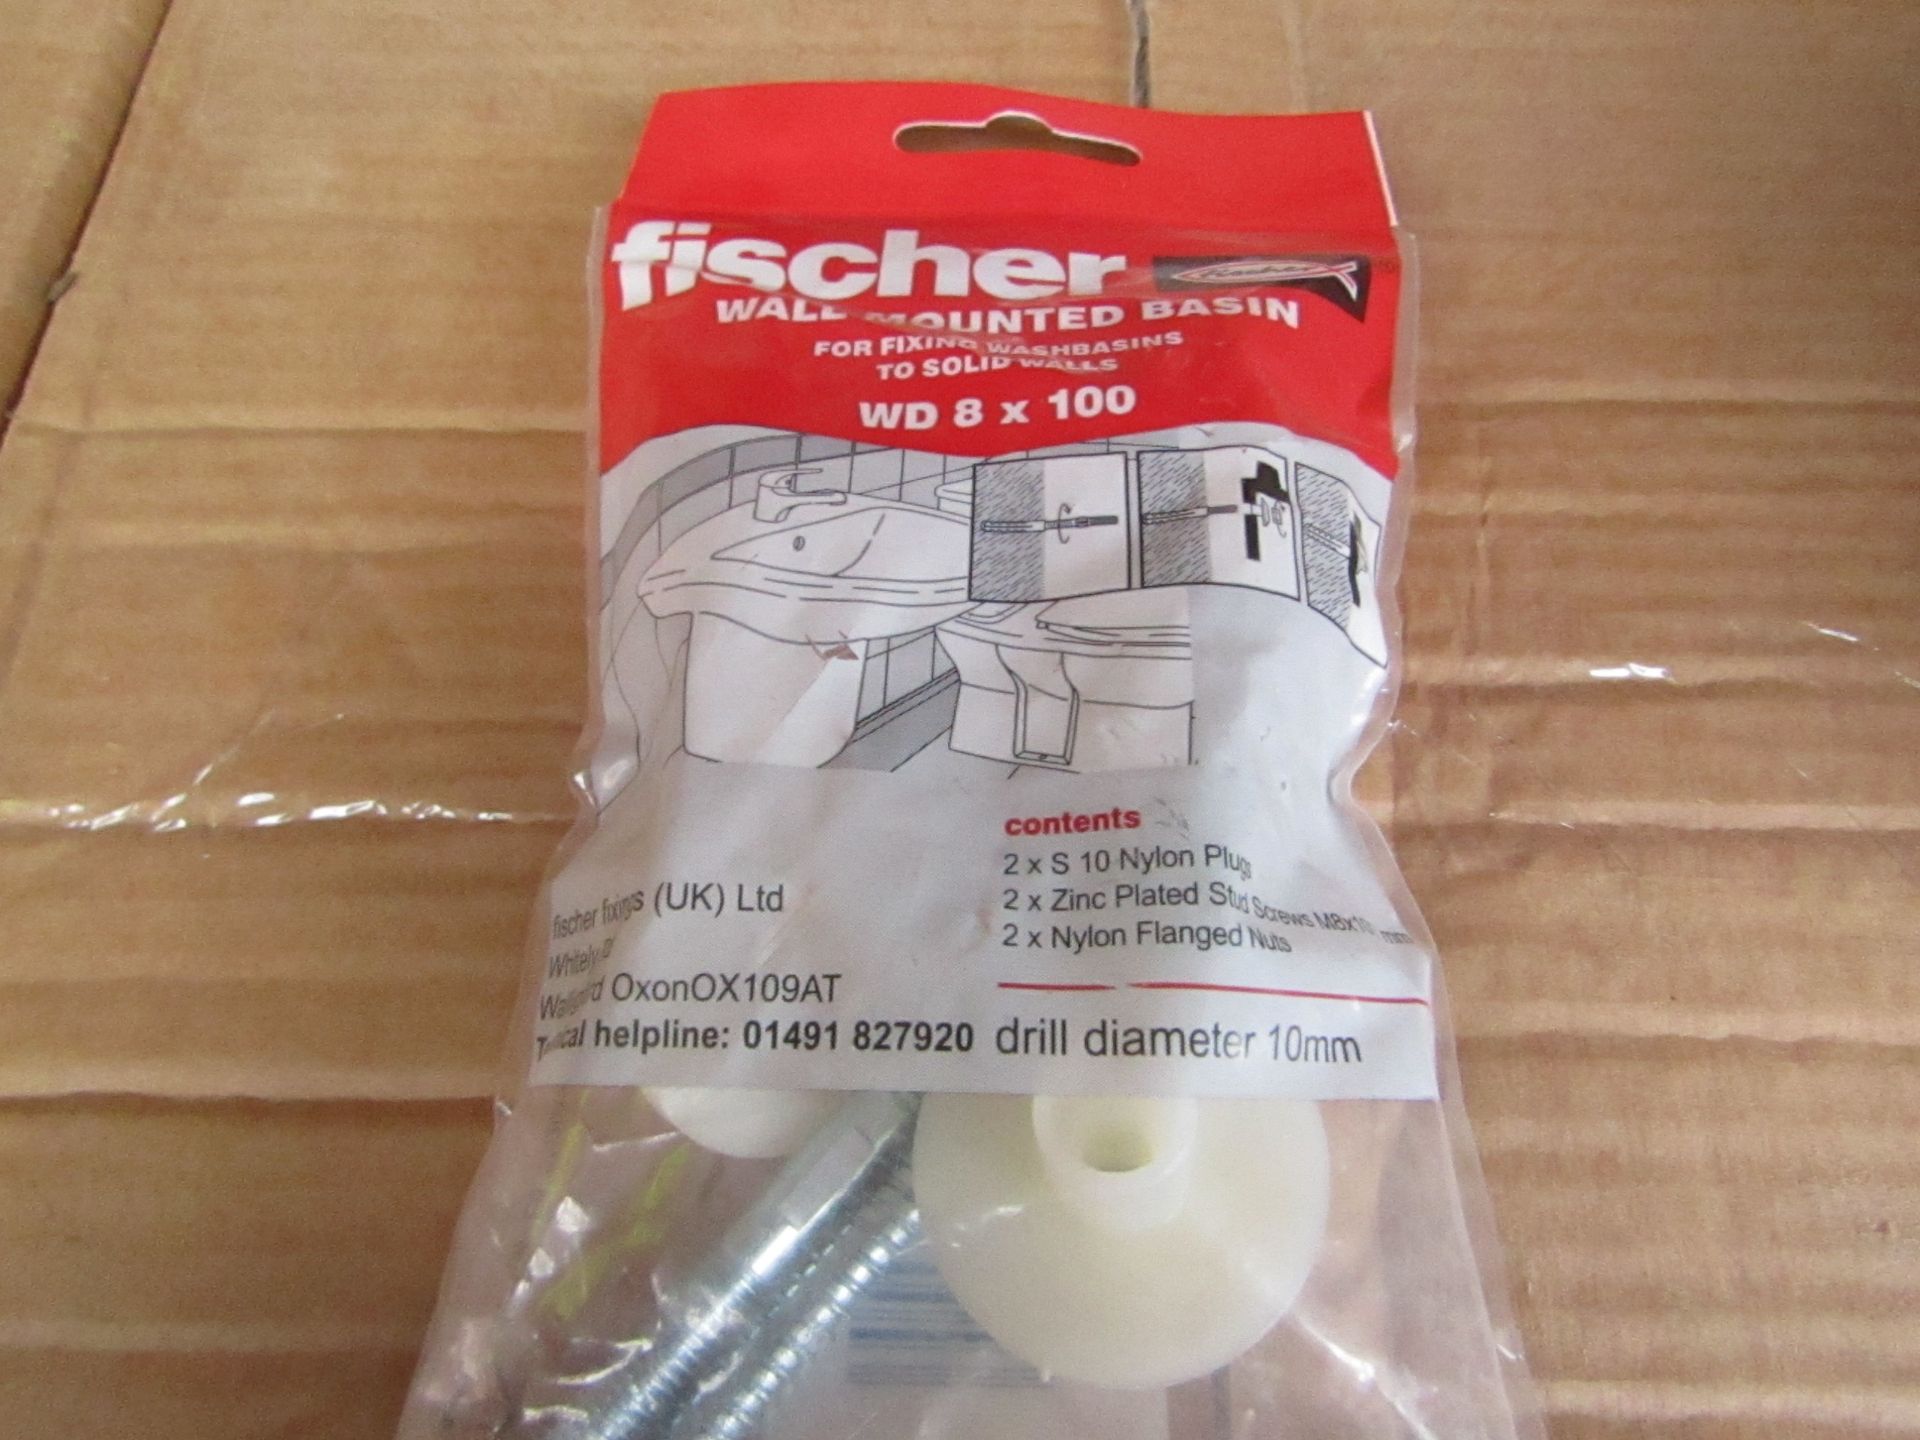 Box 25+ Fischer - Wall Mounted Basin Fixing WD 8 x 100 - New & Packaged.